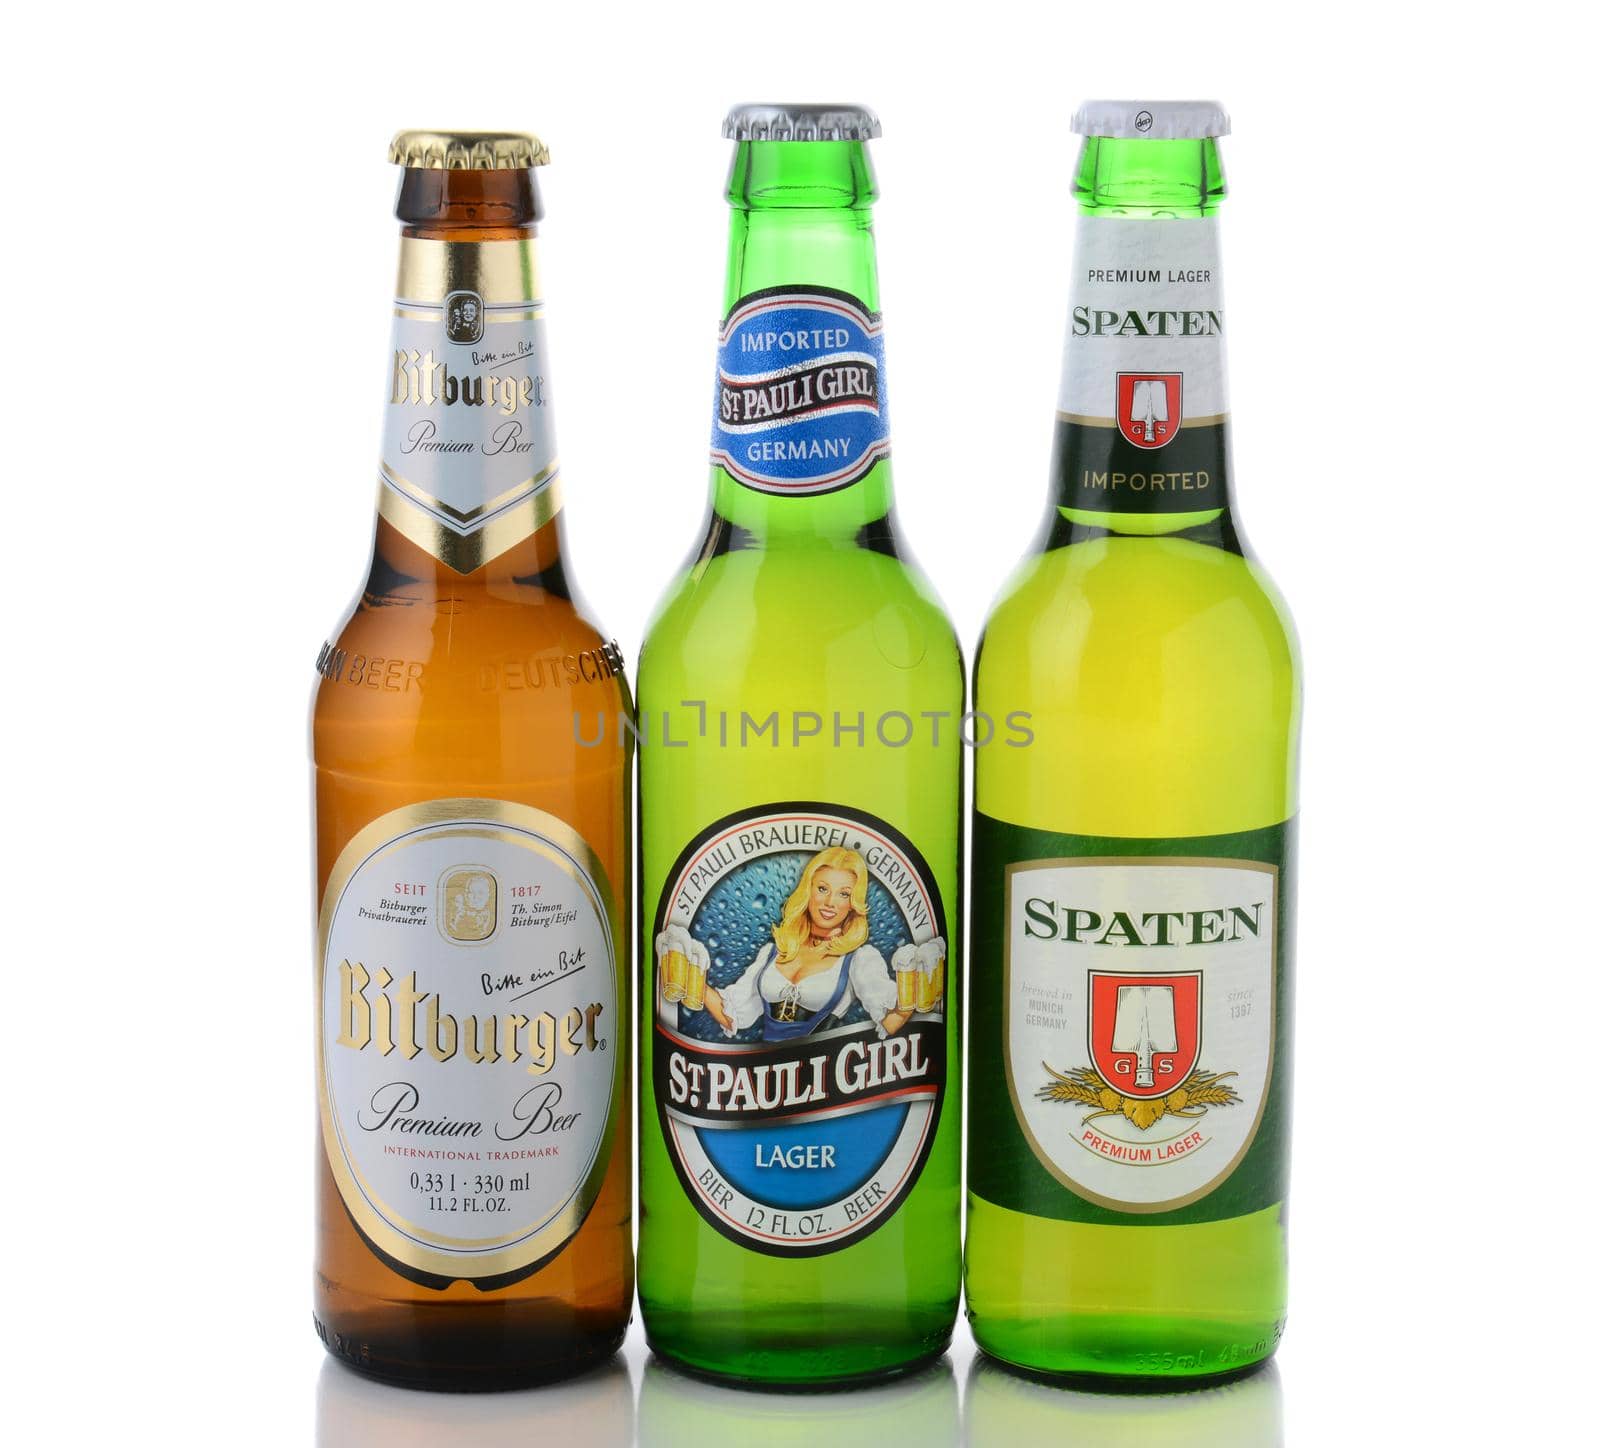 IRVINE, CA - JANUARY, 11, 2015: Three bottles of German beers. St, Pauli Girl, Spaten and Bitburger are three popular German beers imported into the United States.